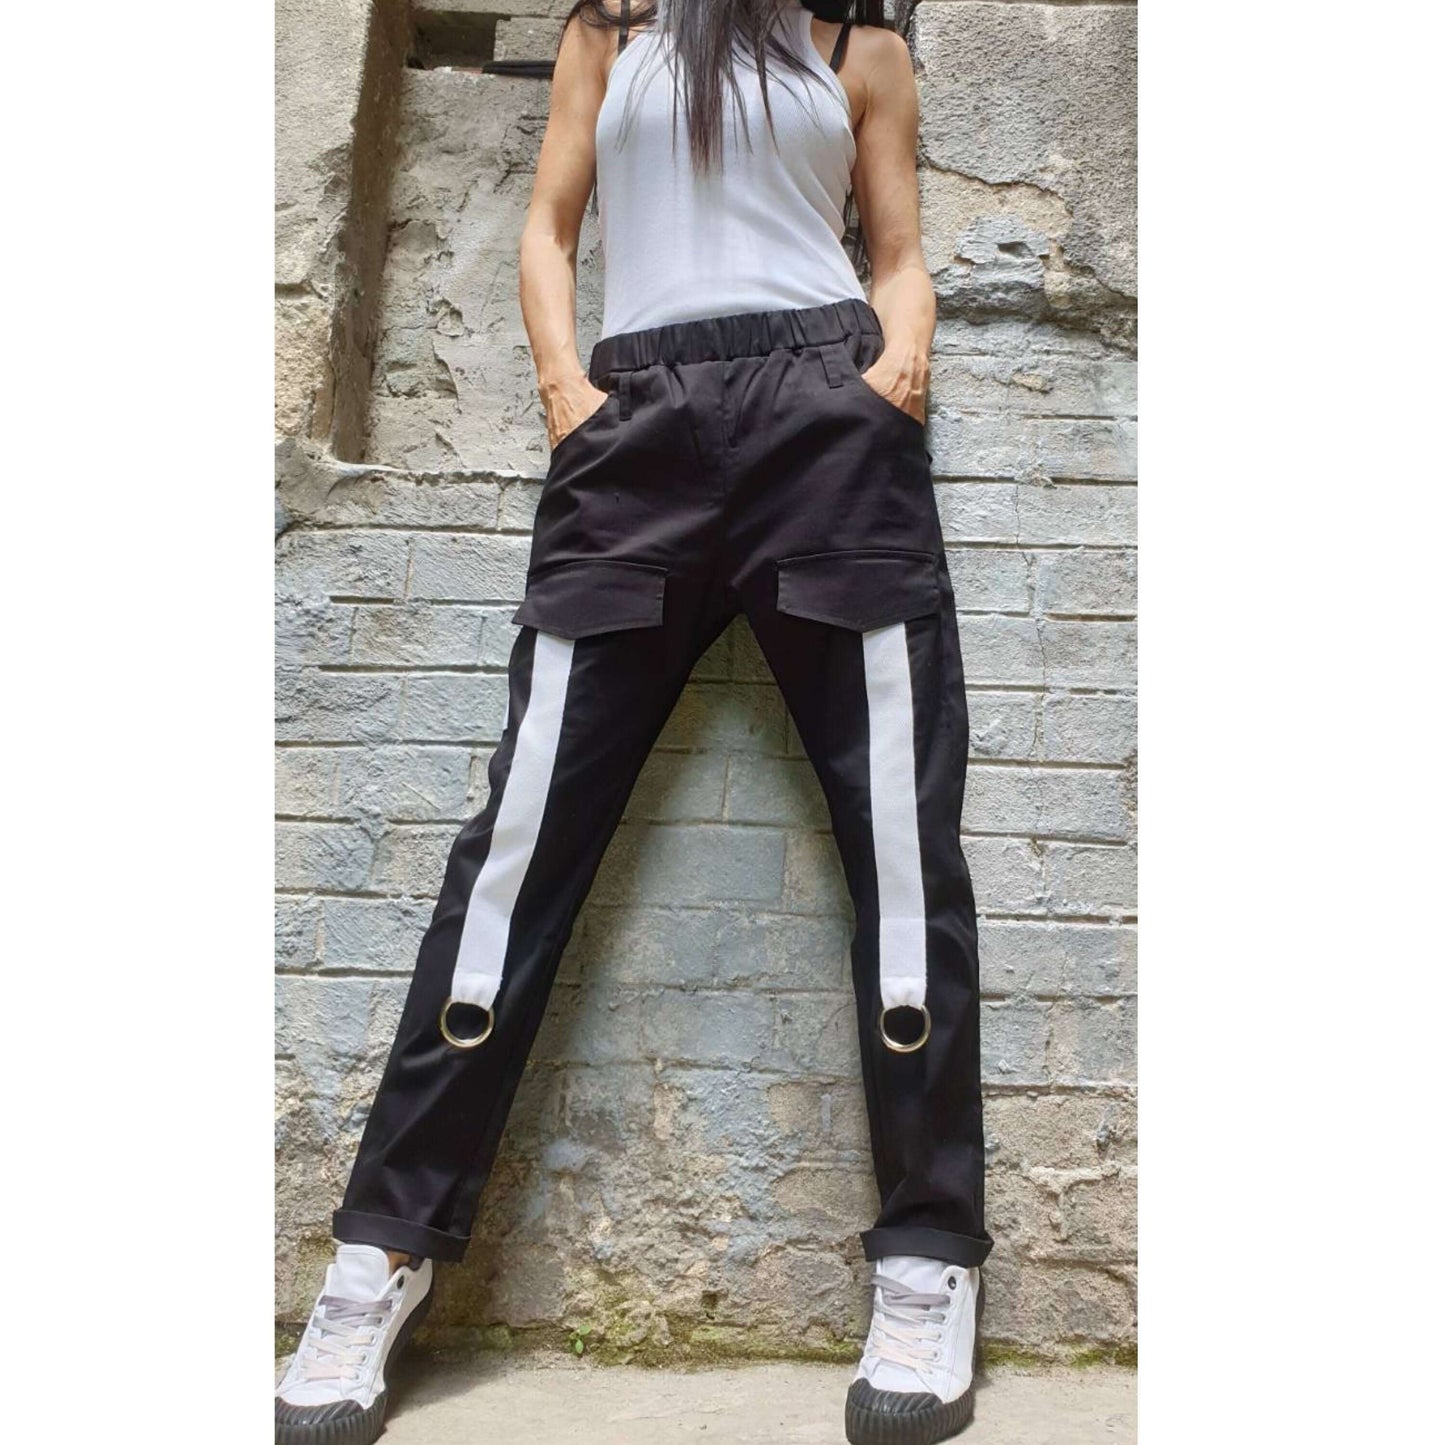 Extravagant Long Trousers - Handmade clothing from AngelBySilvia - Top Designer Brands 